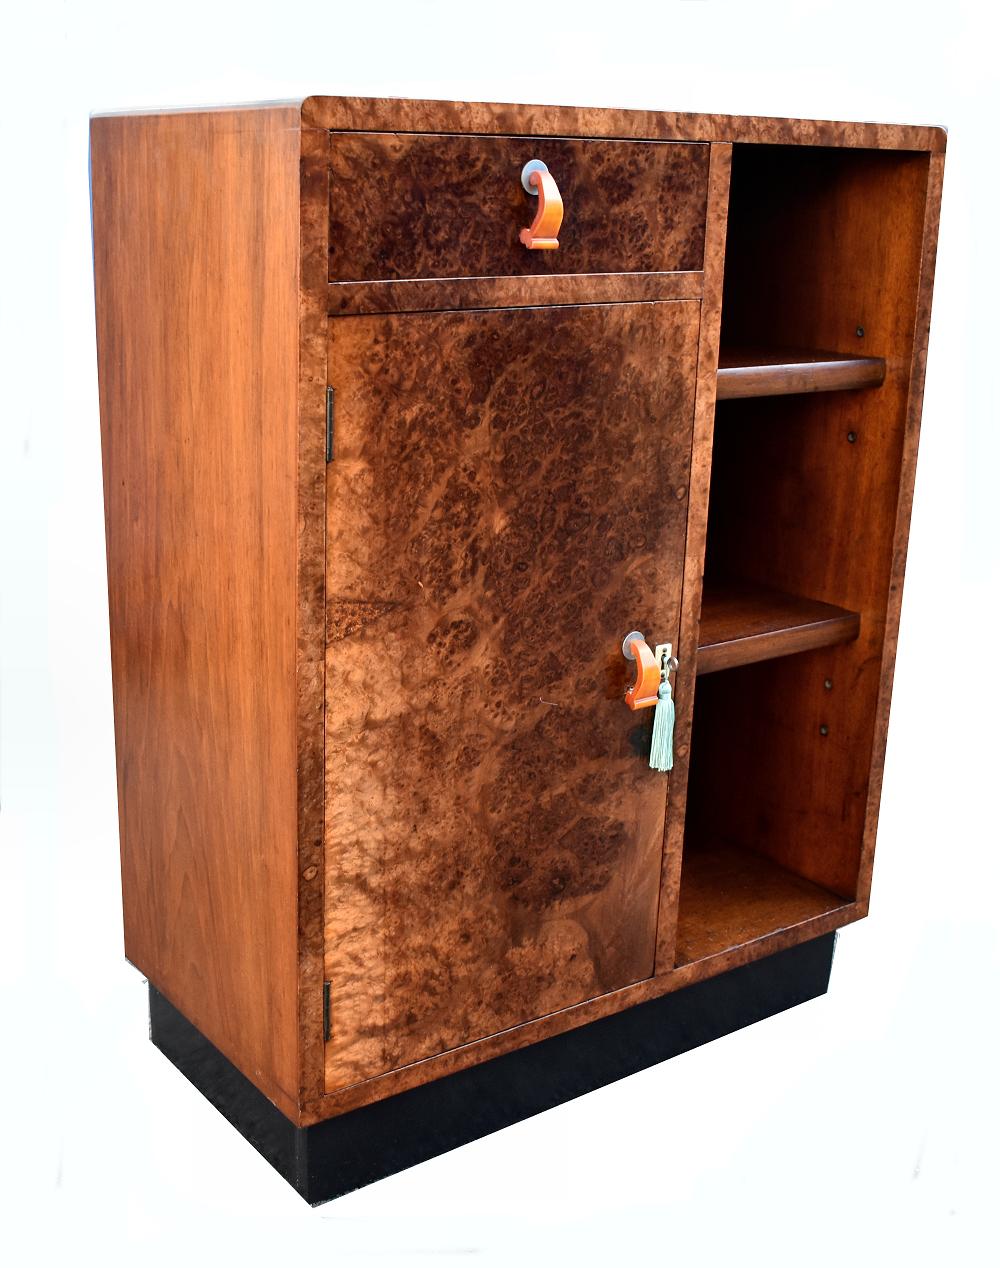 Stylish 1930s Art Deco cupboard with open book shelving. Fabulous walnut veneers that are heavily figured making this piece look very exotic. Generous storage provided by a single drawer and cupboard with an internal shelf and an open adjustable